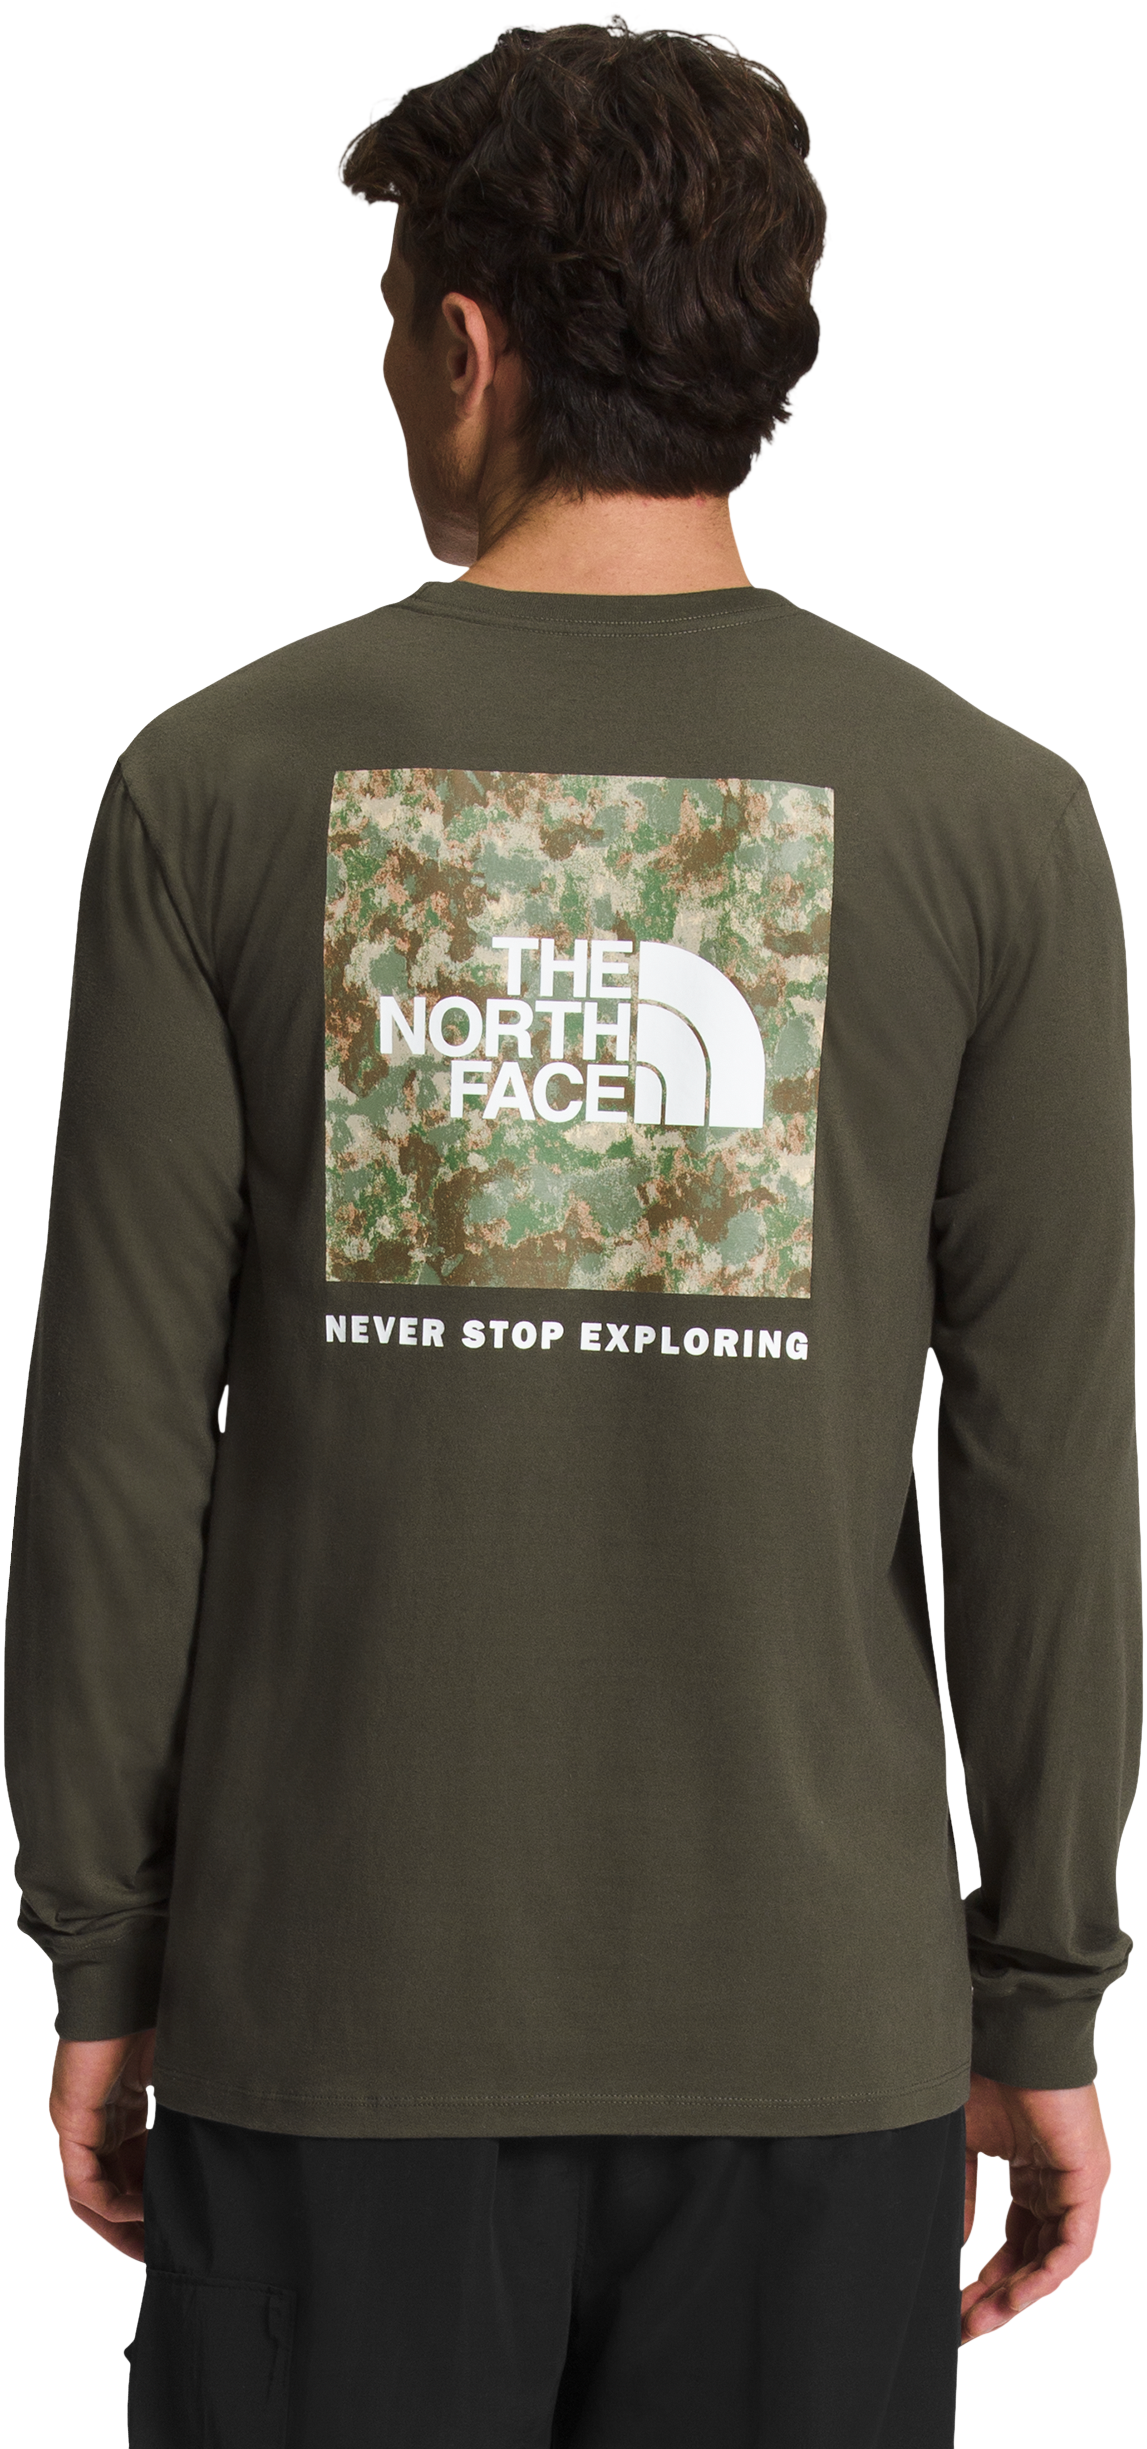 The North Face Box NSE Long-Sleeve Shirt for Men - New Taupe Green/Military Olive - S